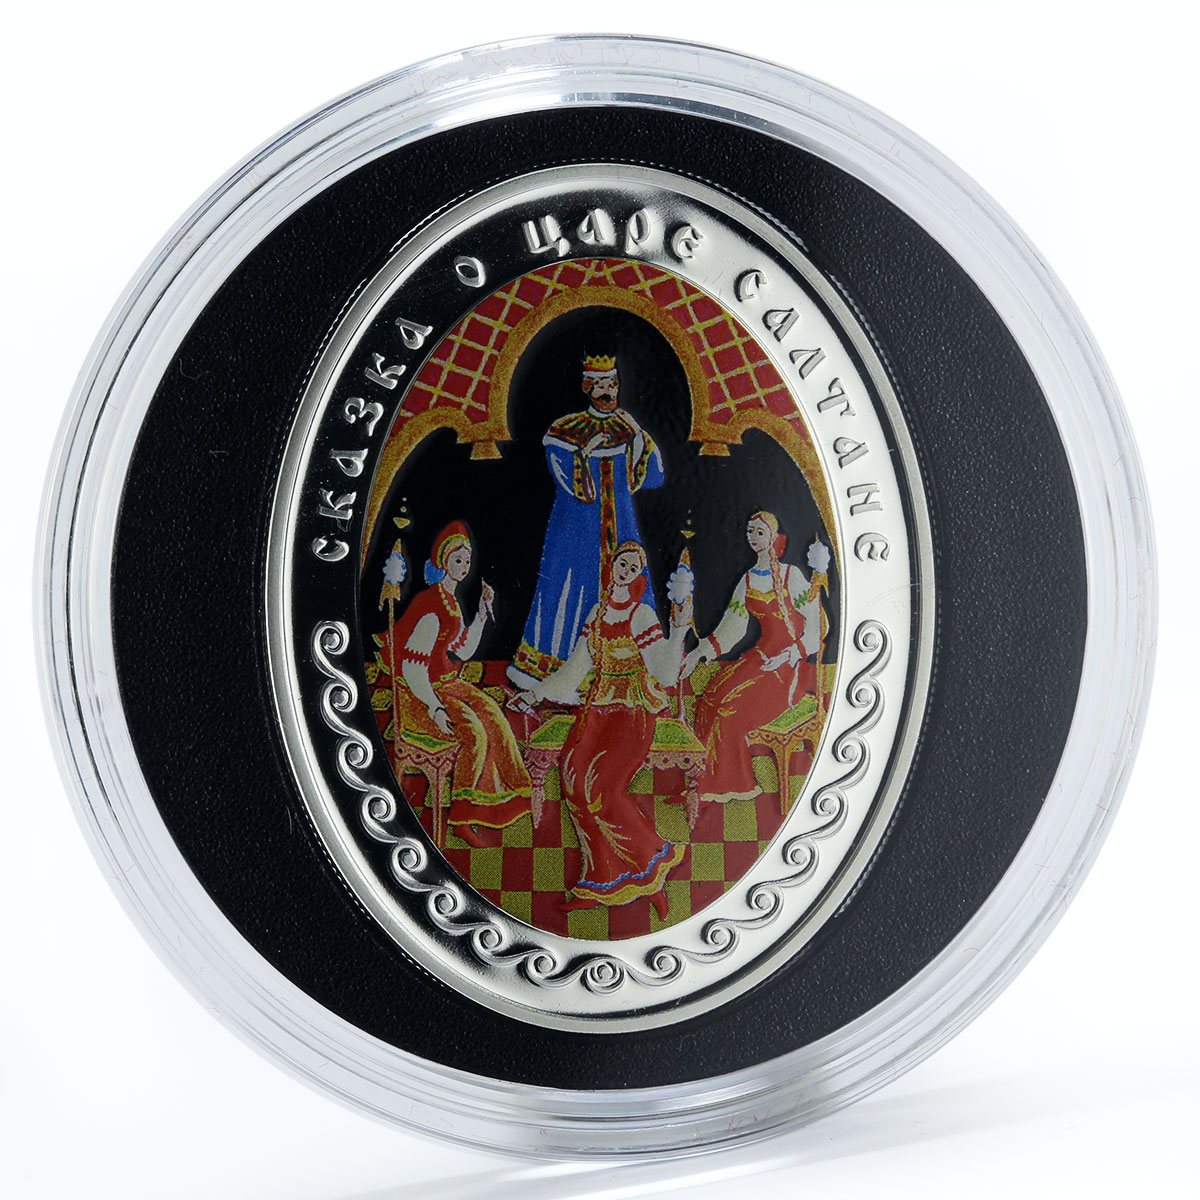 Belarus set 5 coins Alexander Pushkin Fairy Tales colored silver 2009